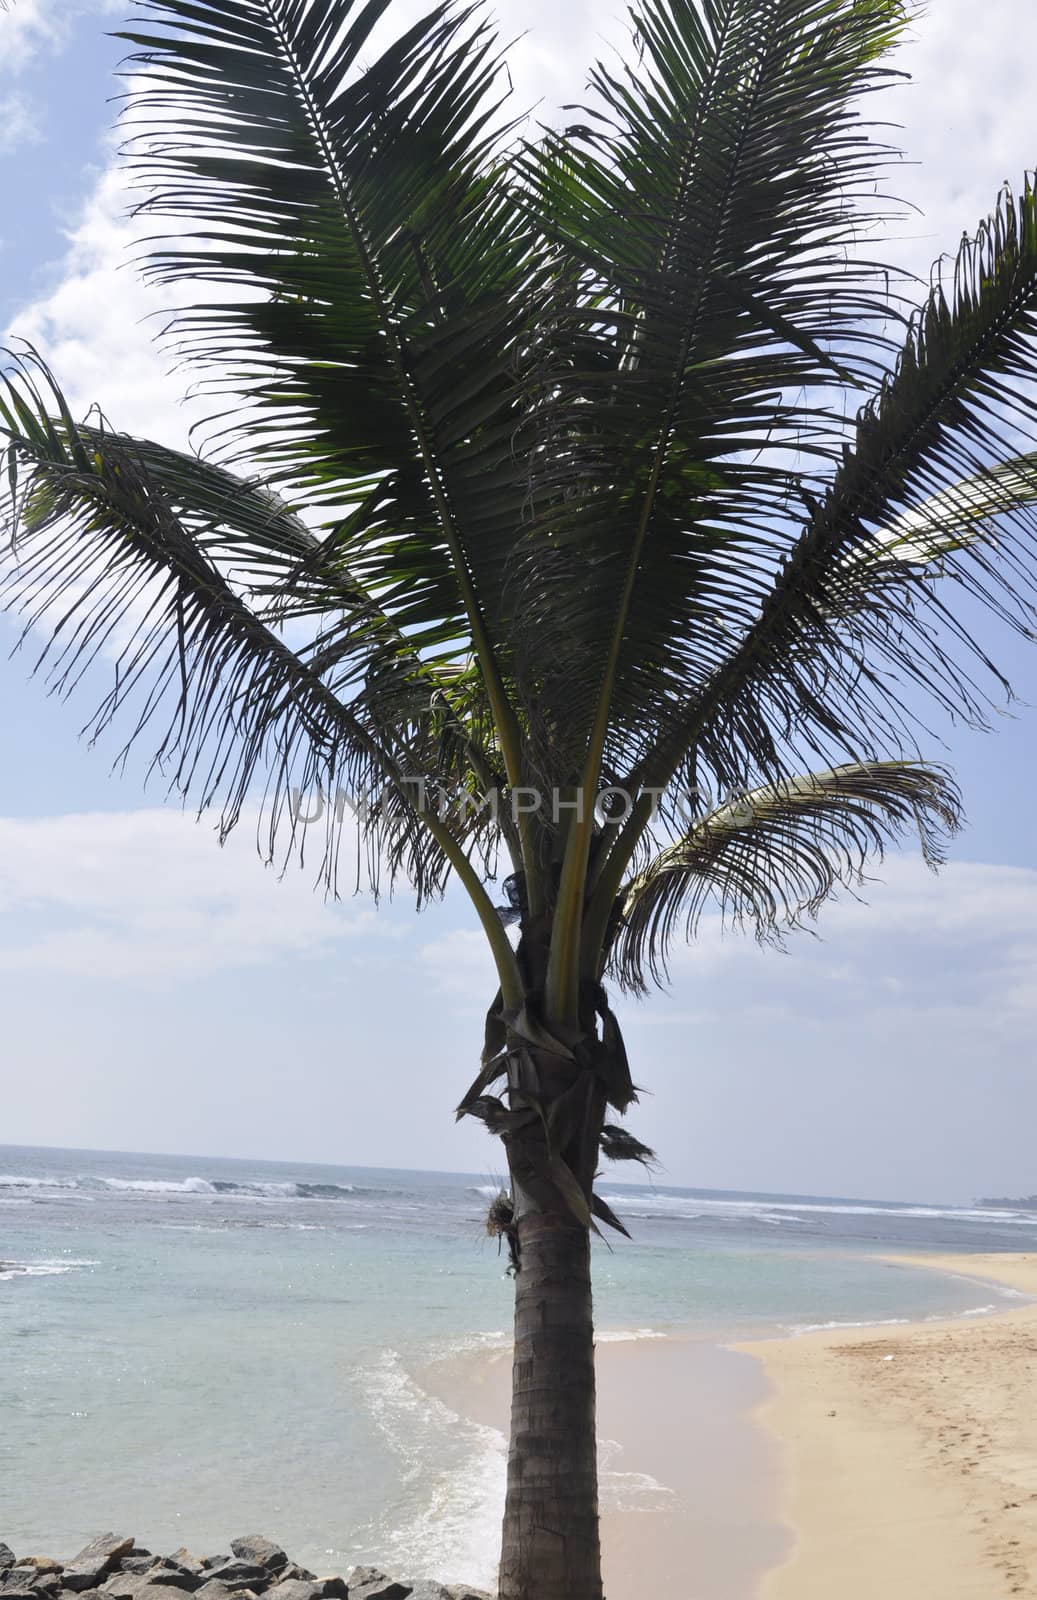 A palm tree at the beach on a warm sunny day by kdreams02